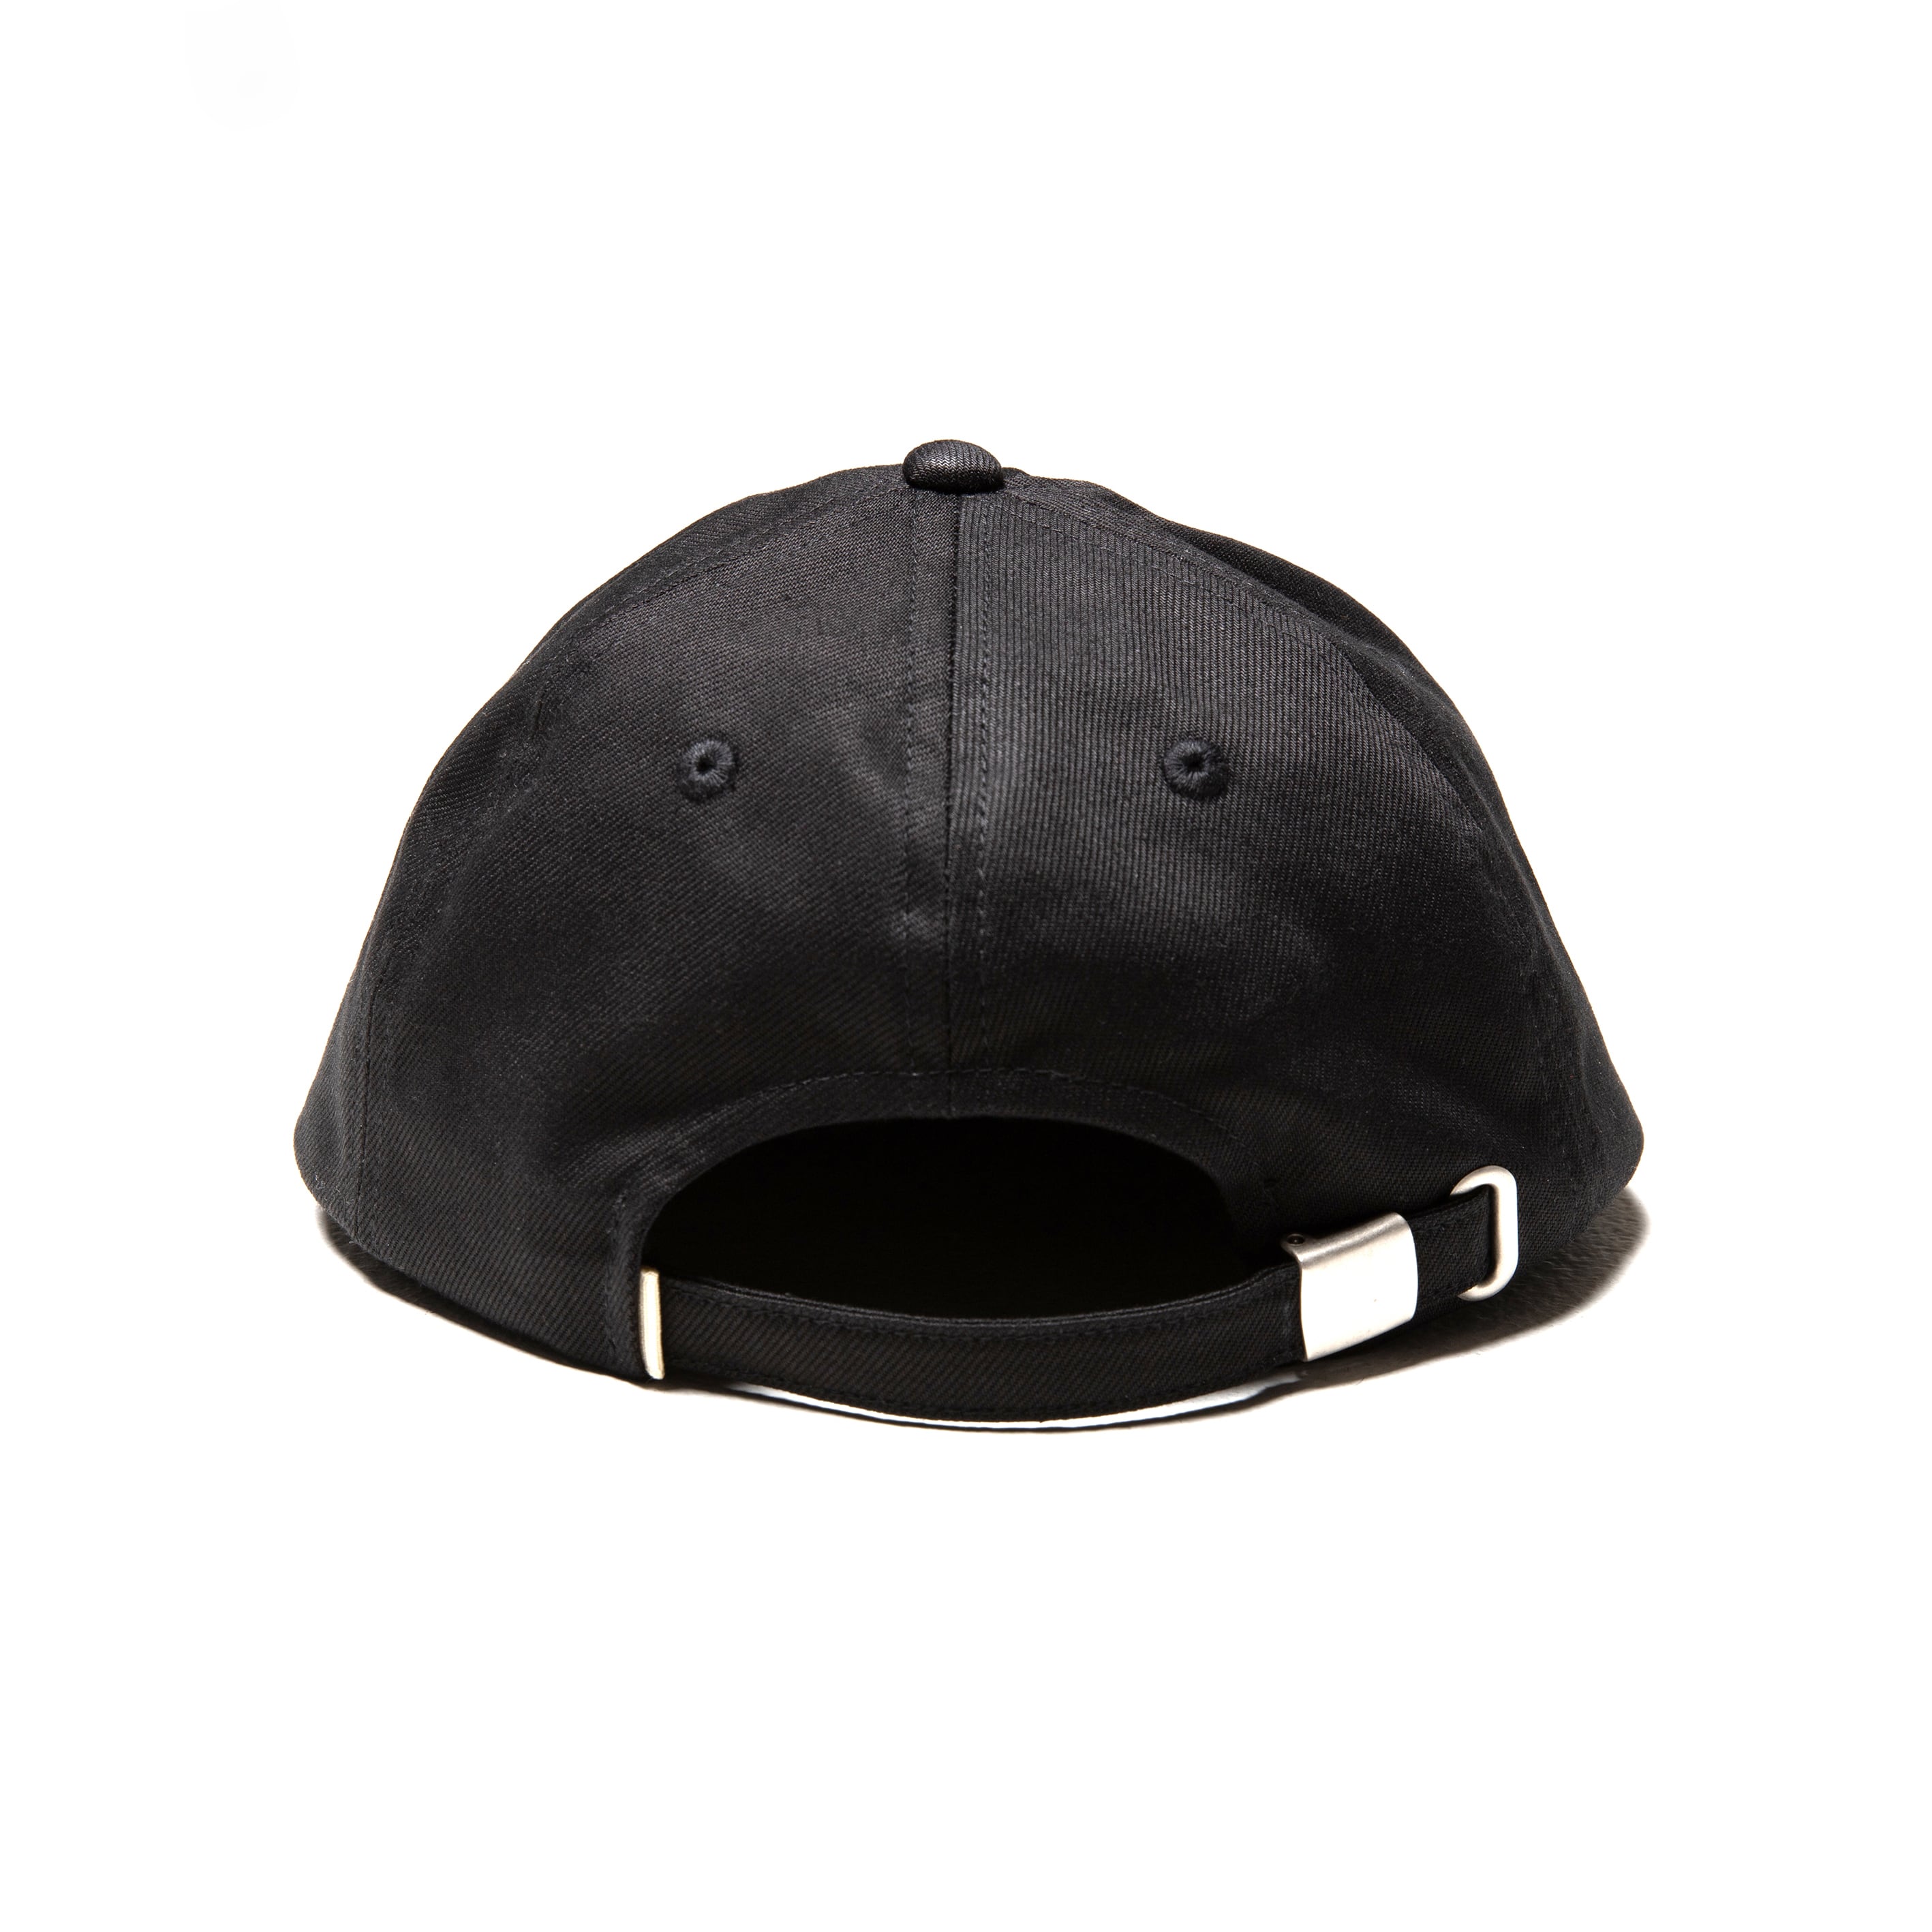 OVY Vintage French Drill 6 Panel Cap